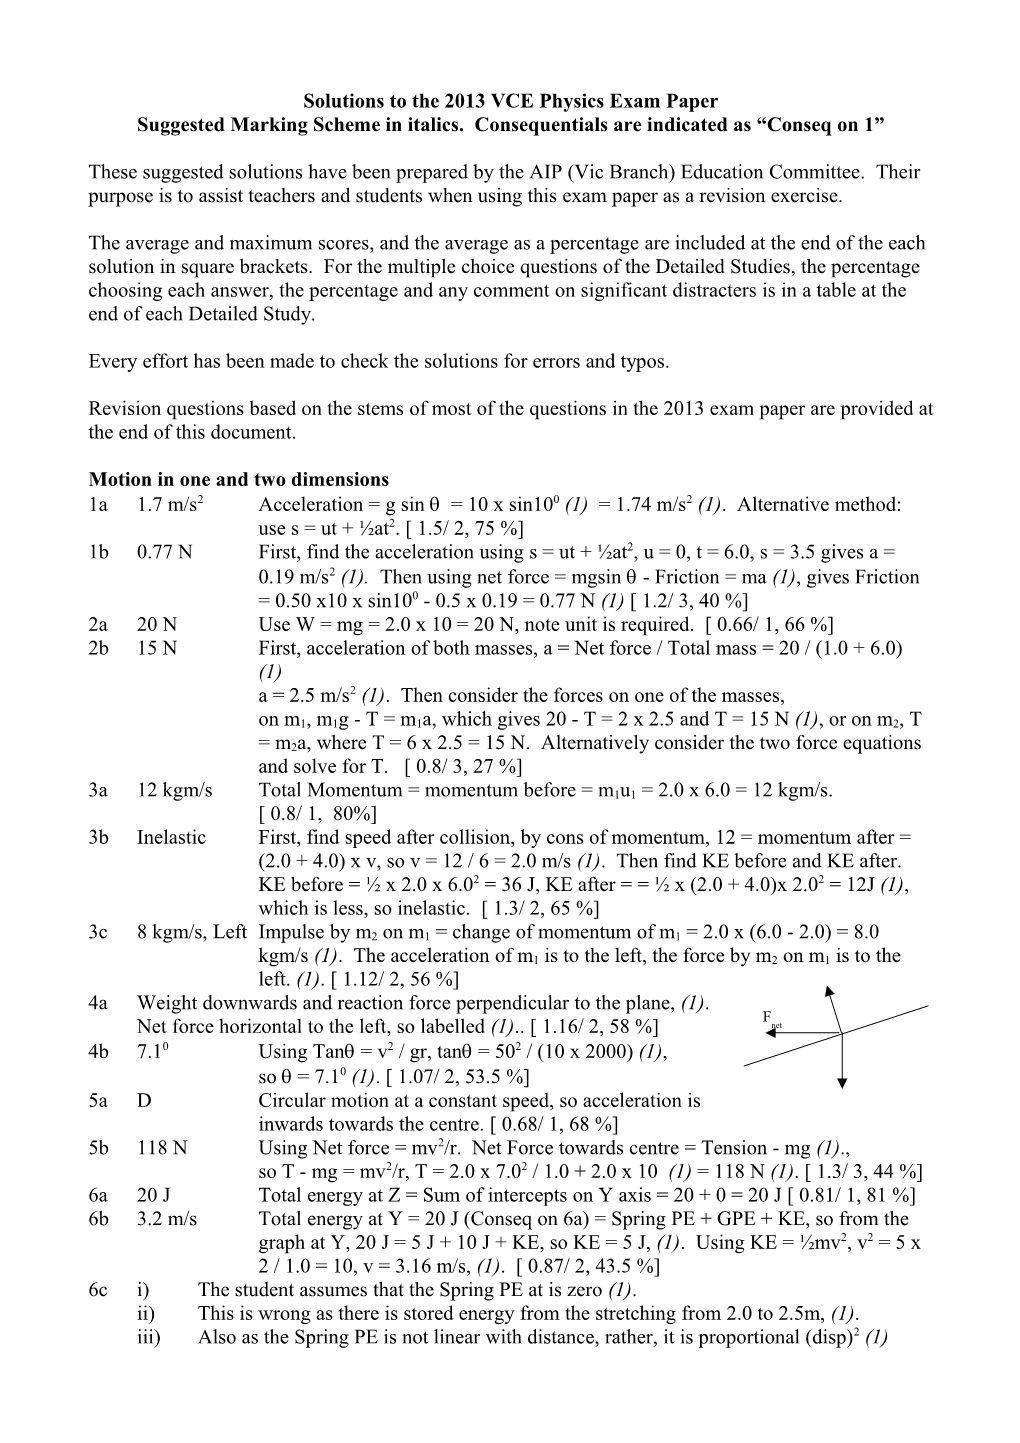 Solutions to the 2013 Sample VCE Physics Exam Paper